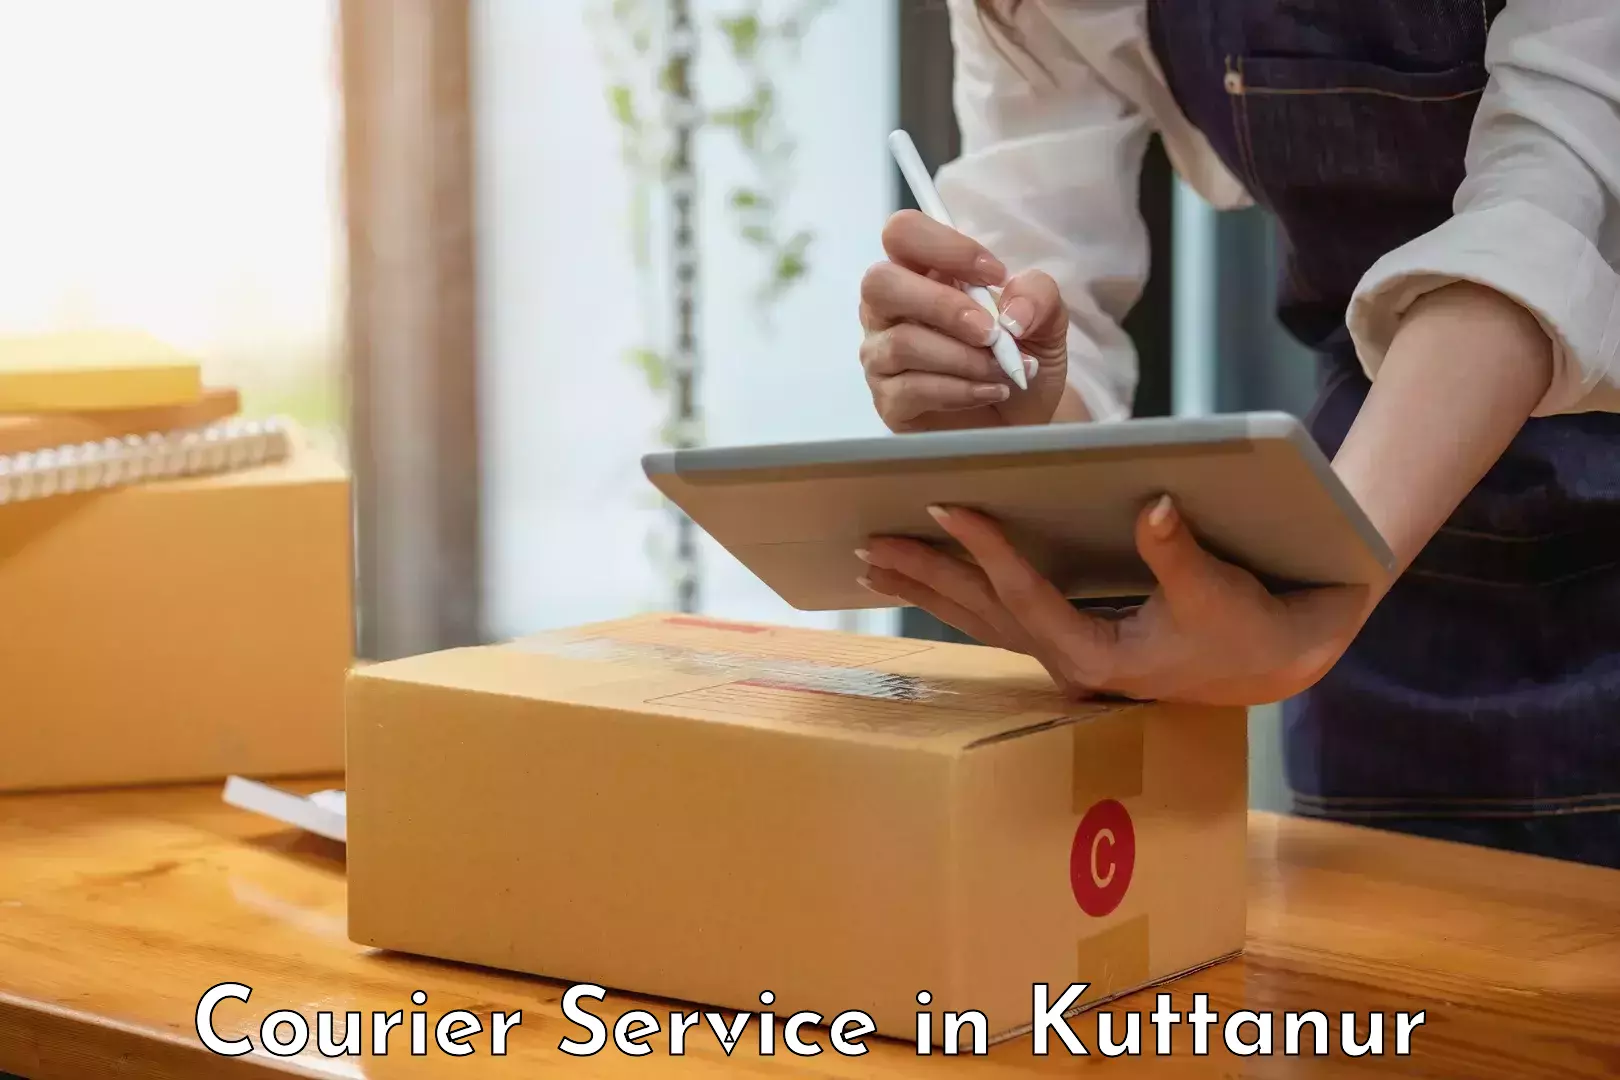 Postal and courier services in Kuttanur